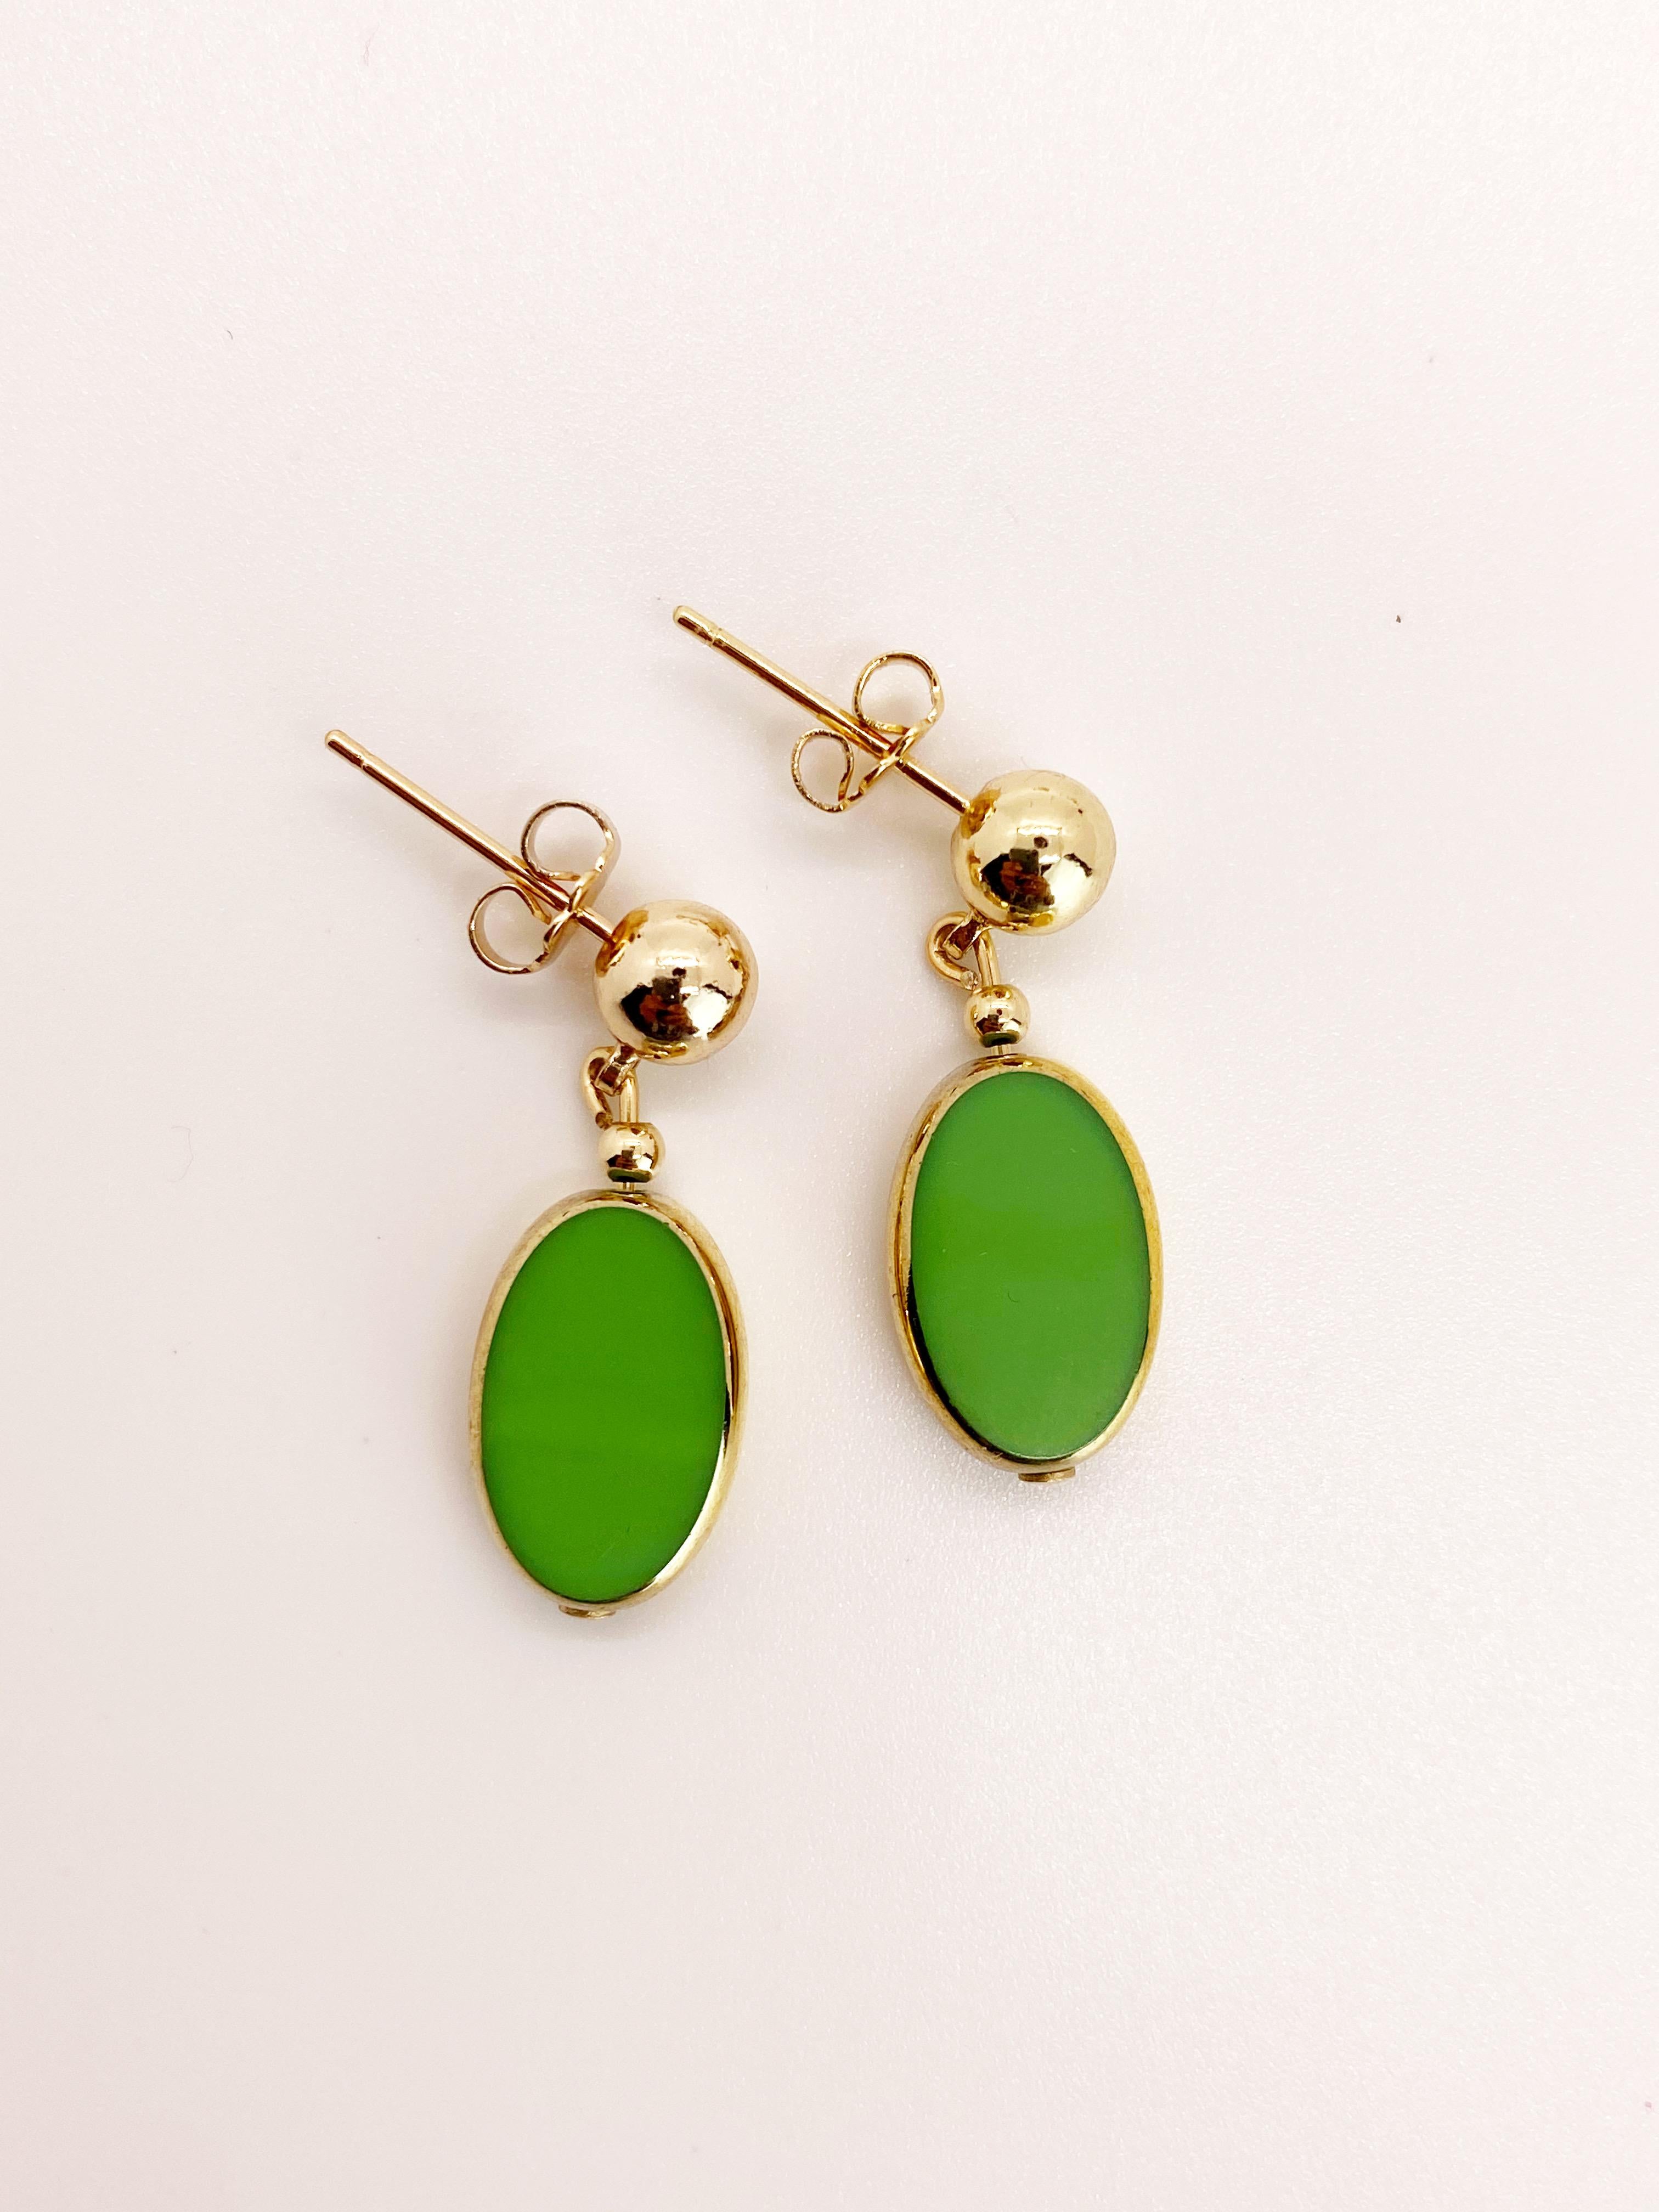 Green Oval German vintage glass beads edged with 24K gold dangles on a 6mm ball 14K gold filled earring post. 

The German vintage glass beads are considered rare and collectible, circa 1920s-1960s.